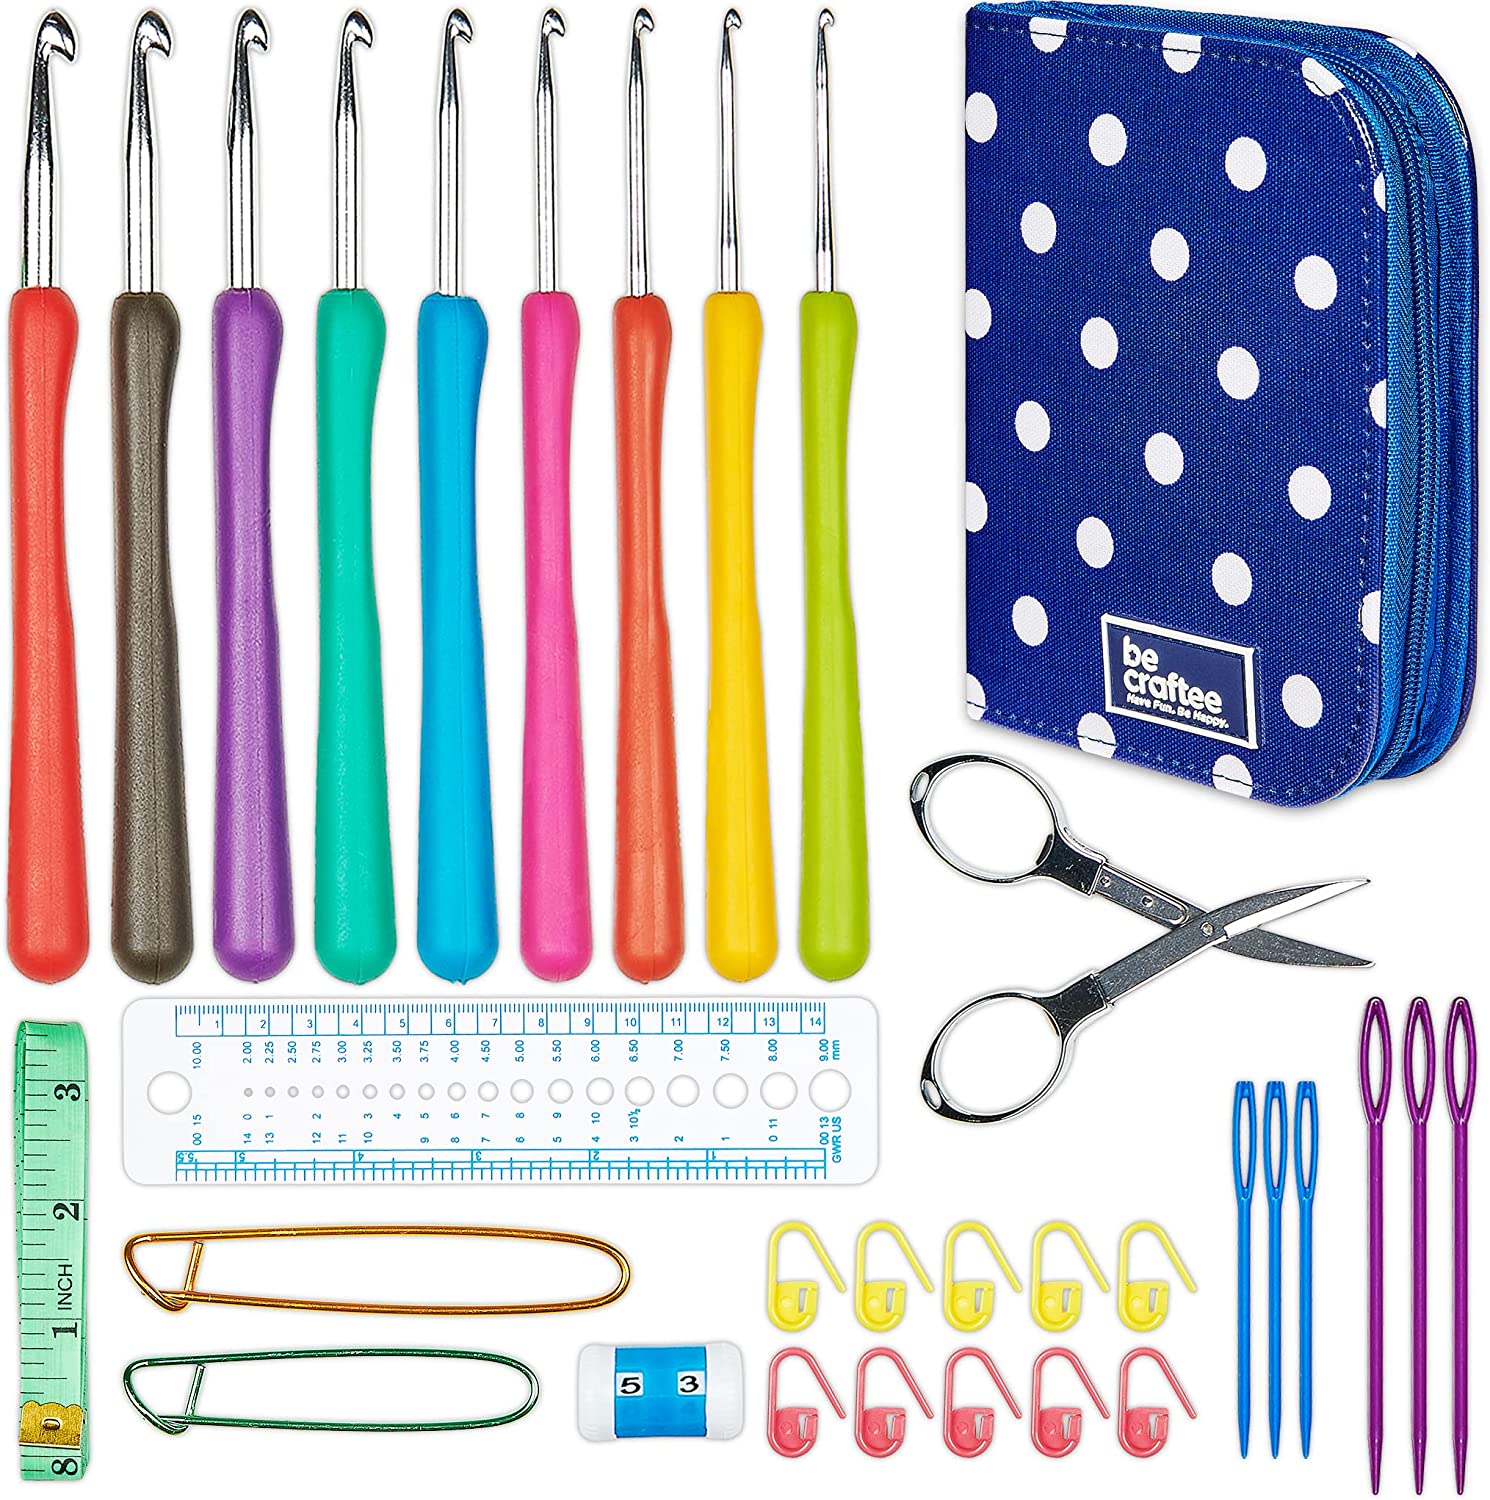 BeCraftee Color-Coded Crochet Hook Kit, 31-Piece